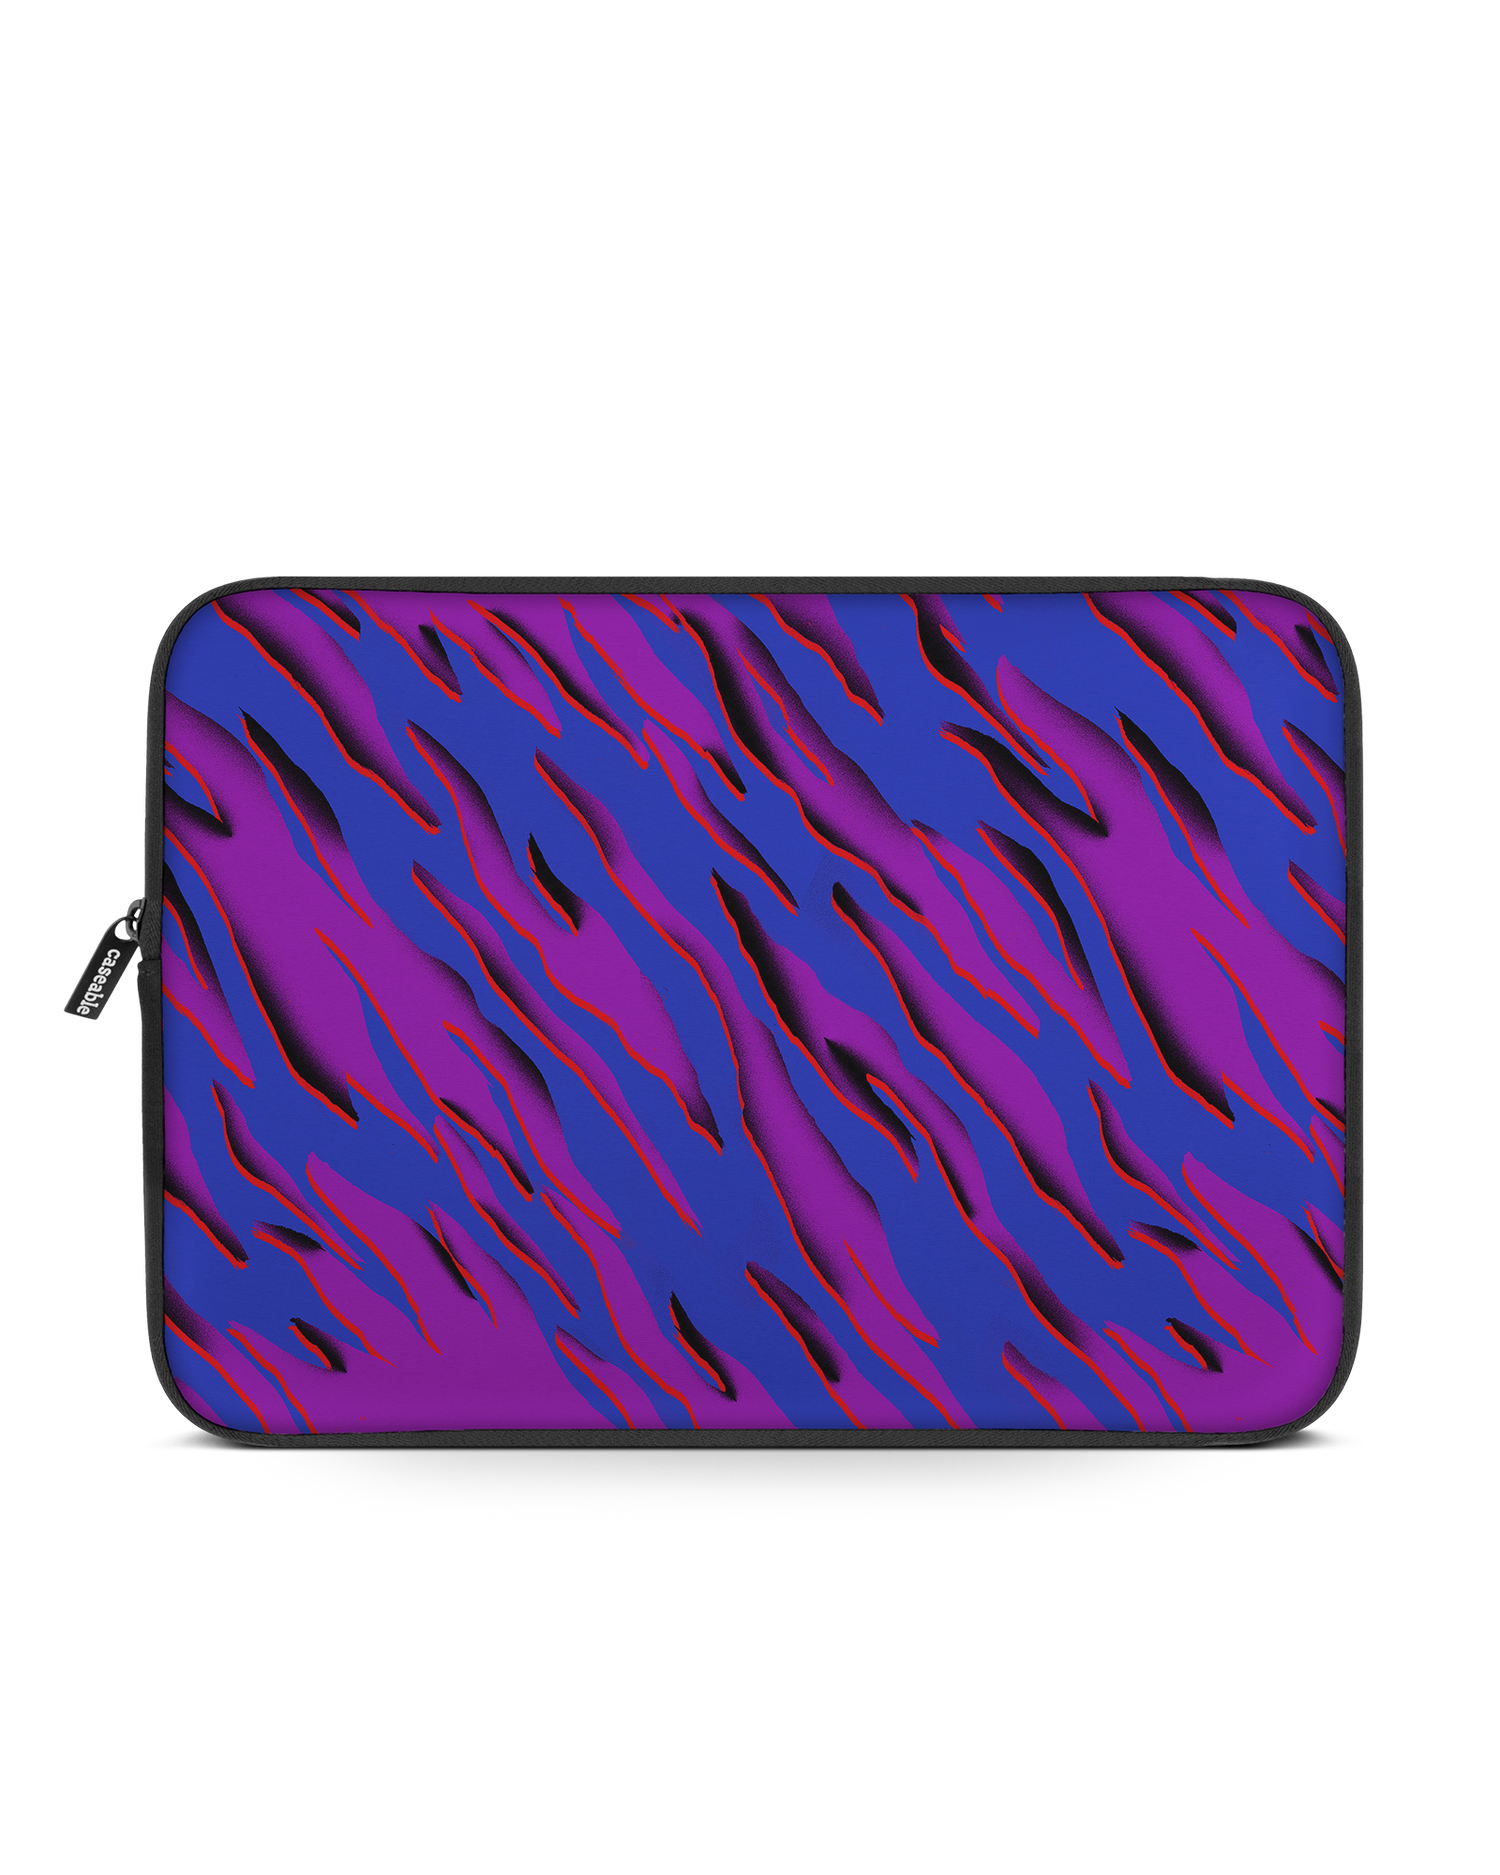 Electric Ocean 2 Laptop Case 16 inch: Front View